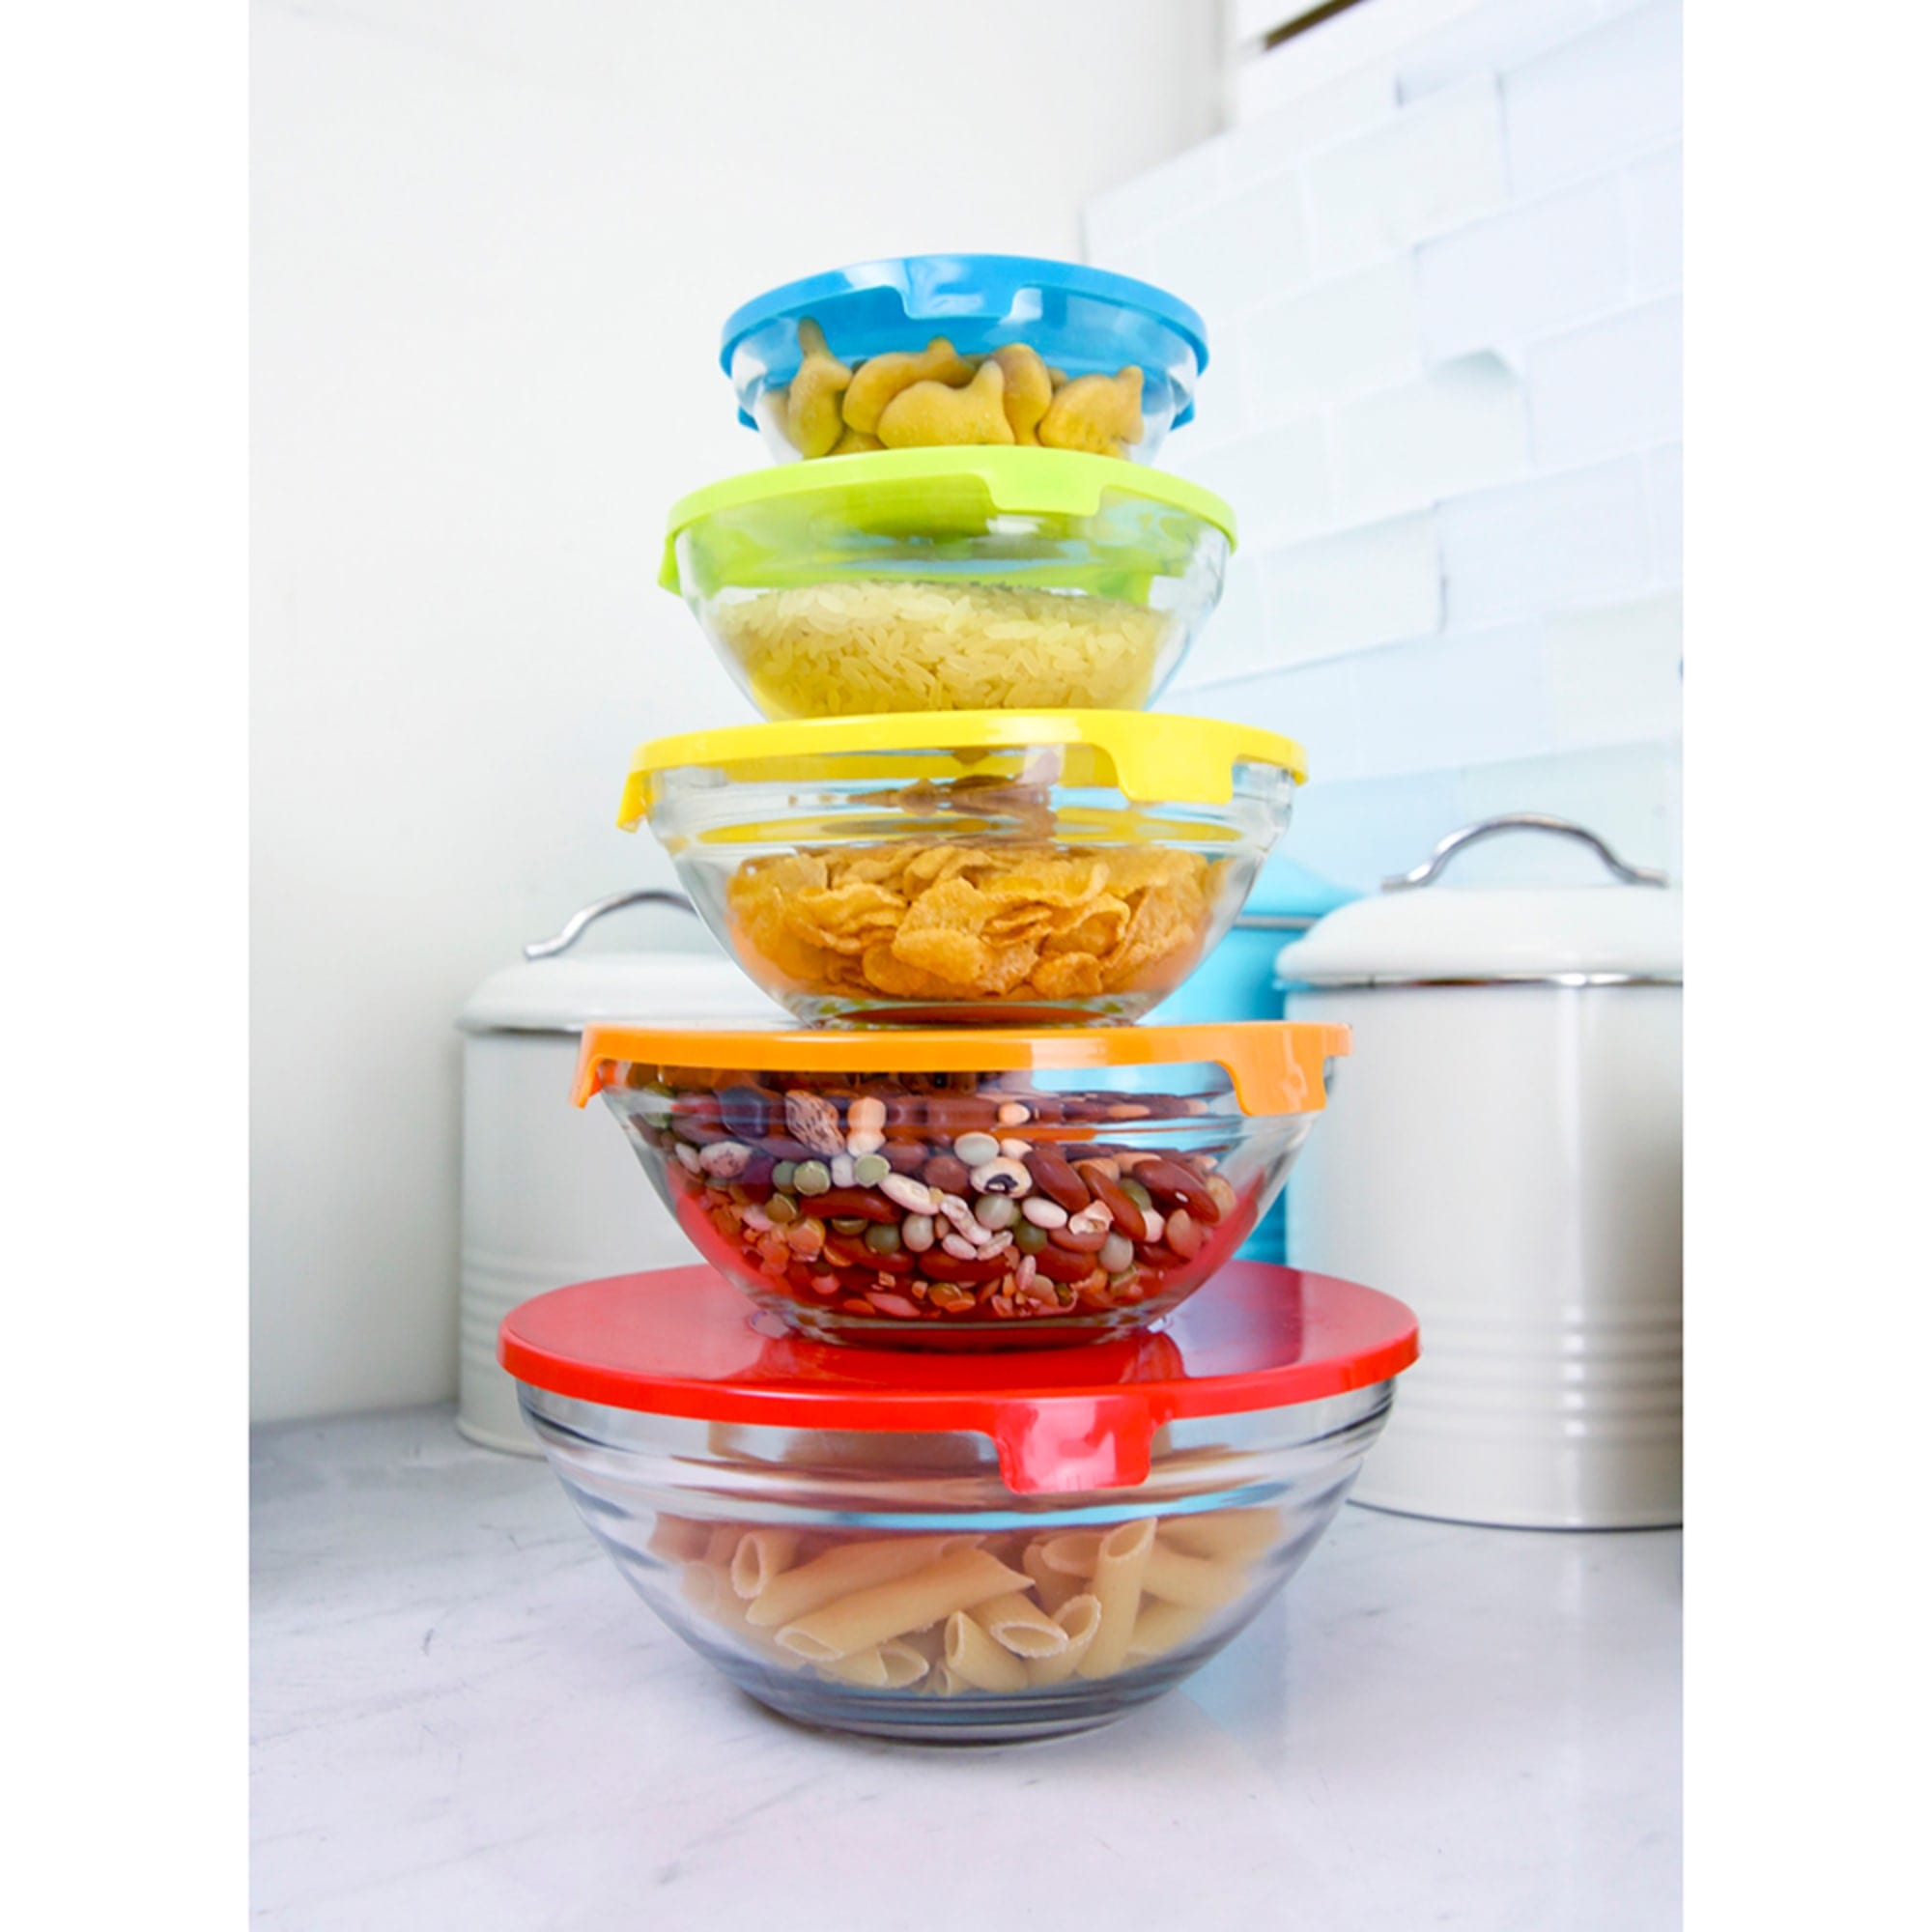 Set of 5 - Colorful Mixing Bowls - Plastic Mixing Bowl Set for